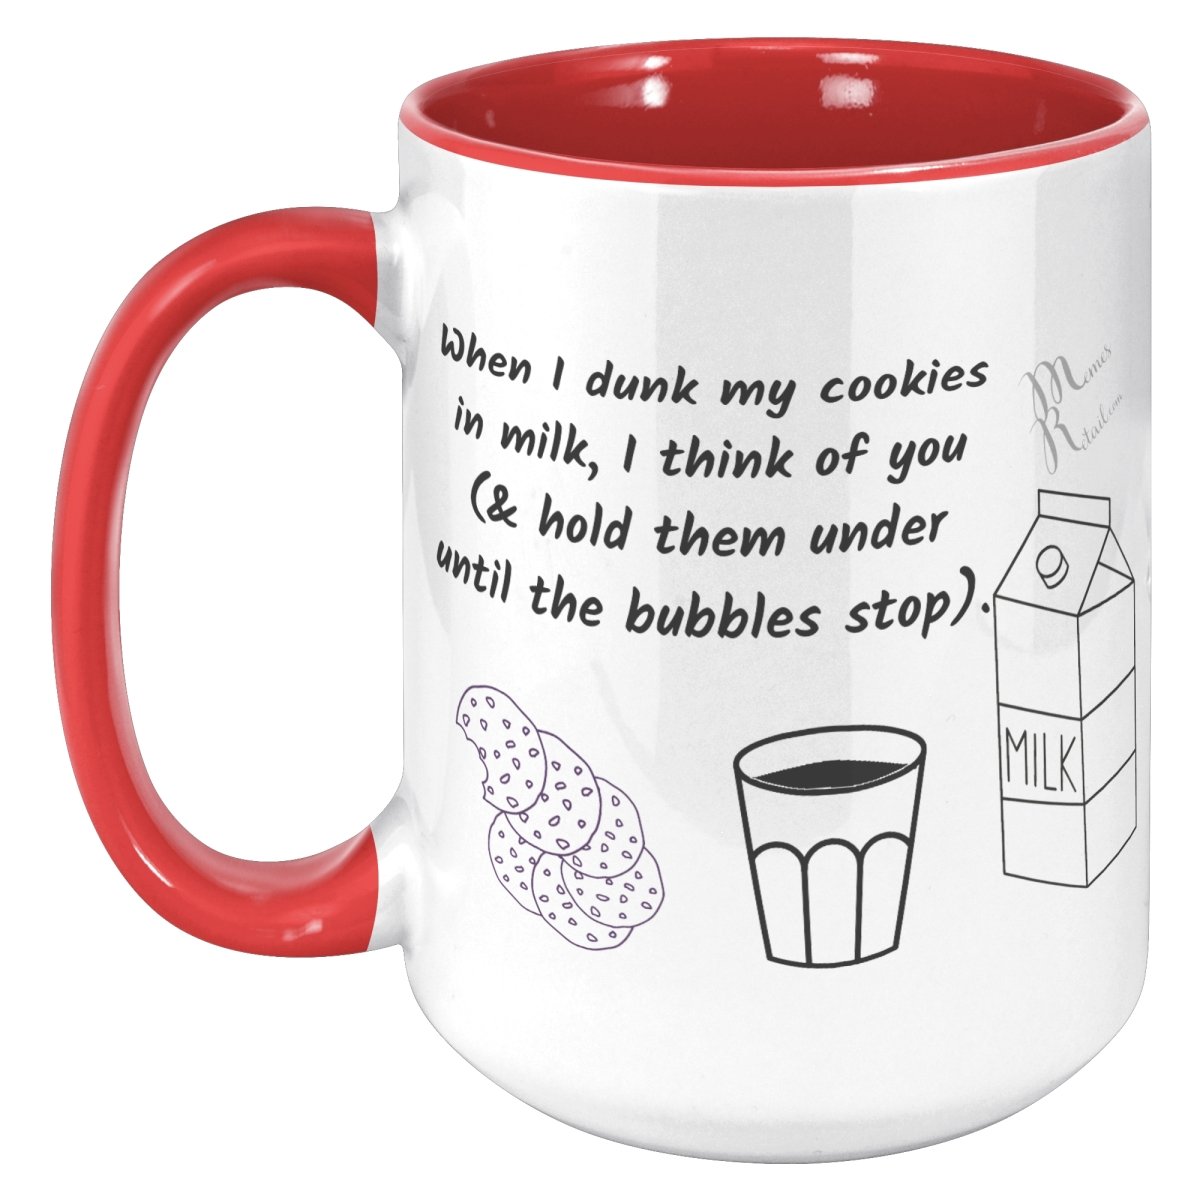 When I dunk My Cookies in Milk, I think of You - 11oz/15oz Mugs, 15oz / Red Accent - MemesRetail.com